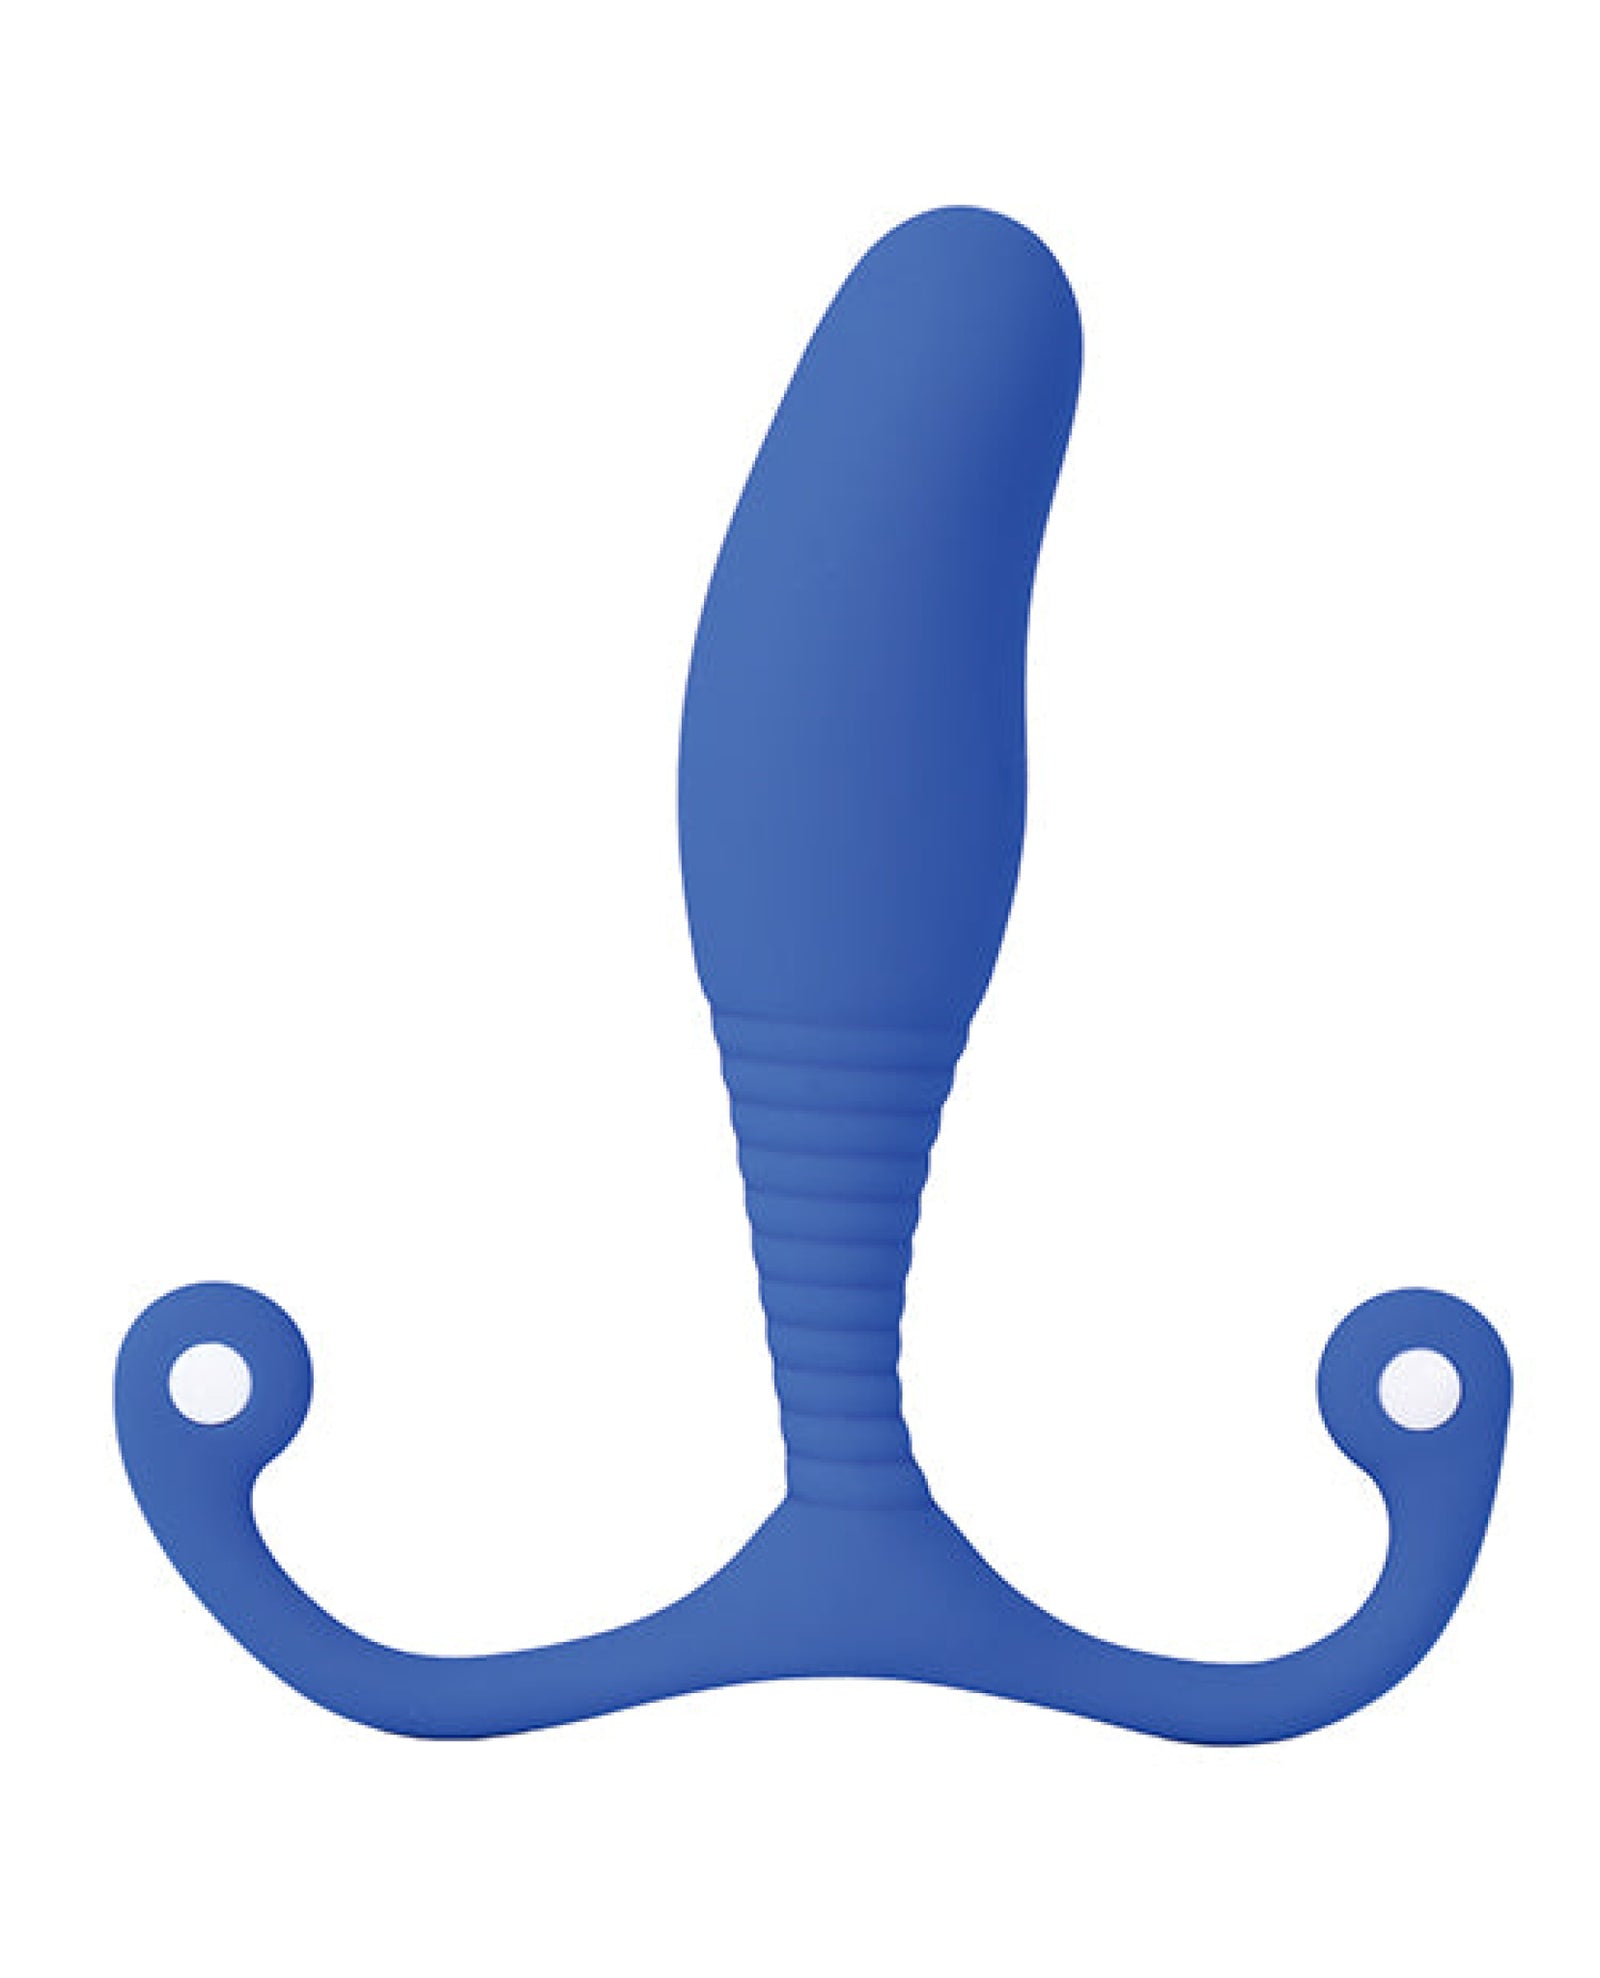 Aneros Special Edition Mgx Syn Trident Series Prostate Stimulator - Blue Aneros